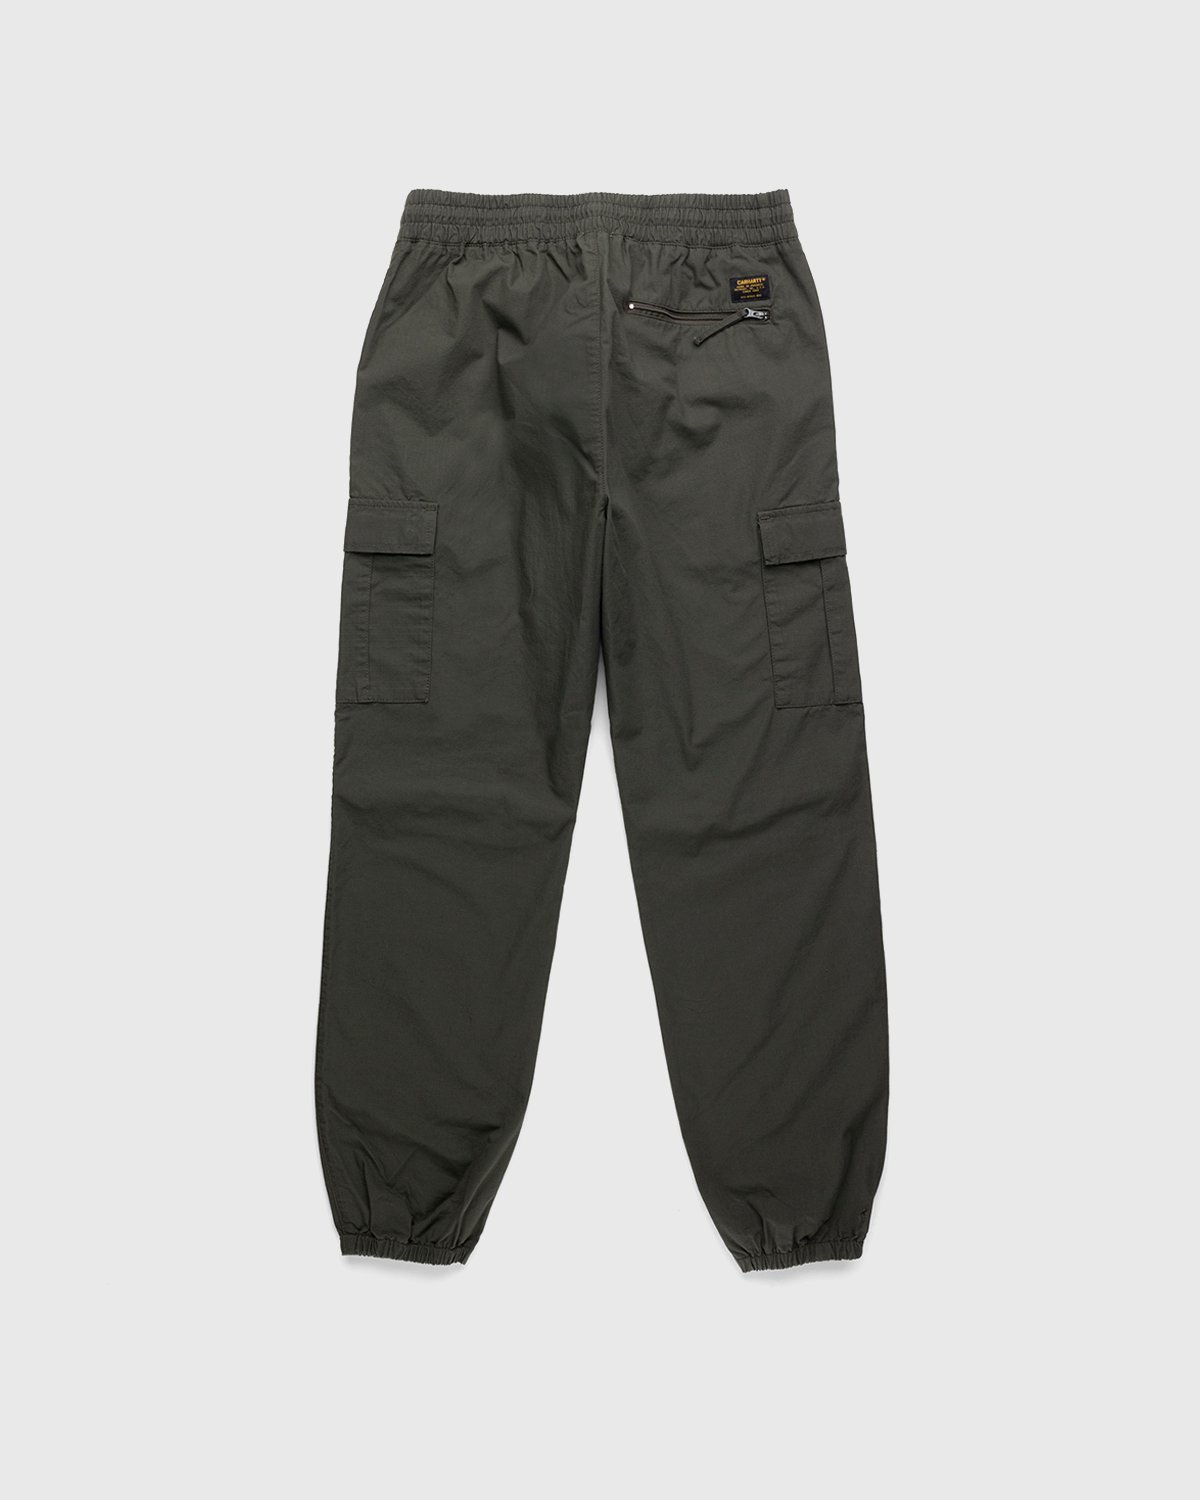 Carhartt WIP - Cargo Jogger Cypress Rinsed - Clothing - Green - Image 2